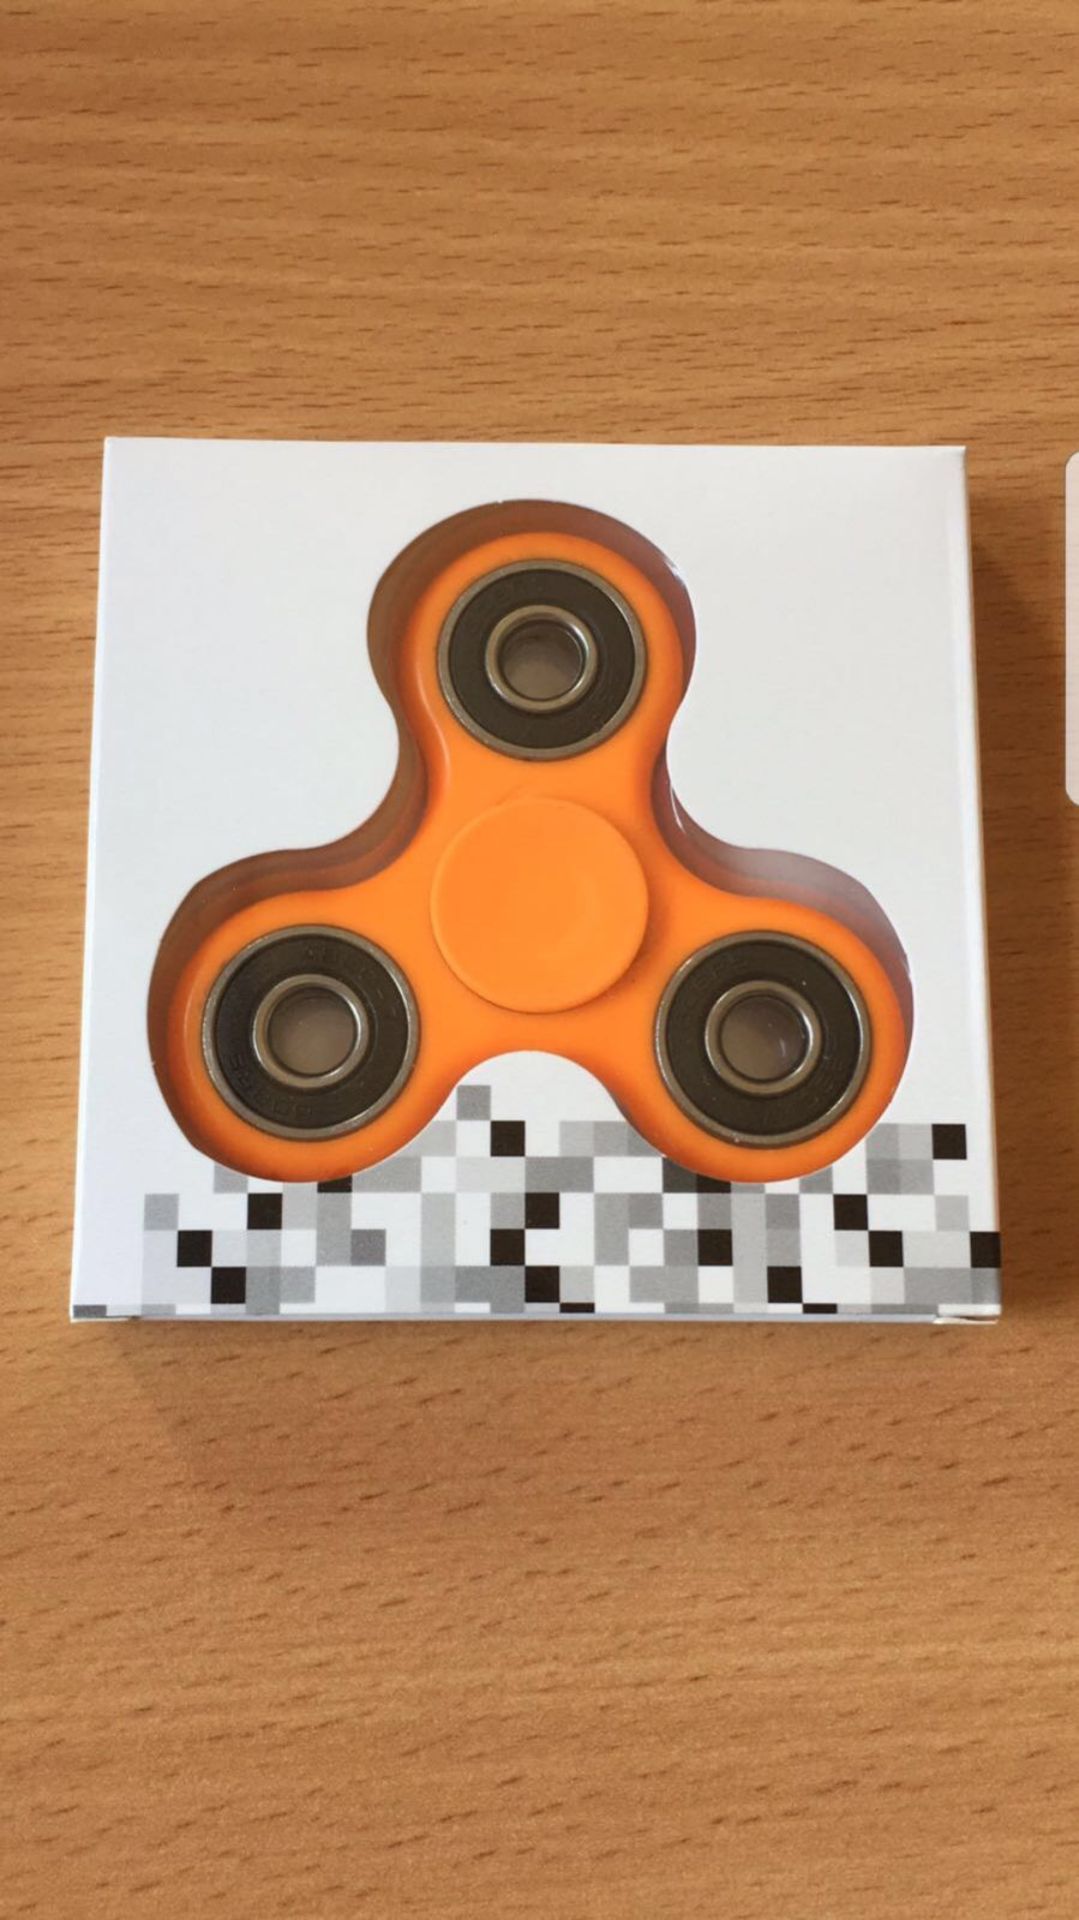 10 x Fidget Spinners. Various Colours Including: Black, Orange, Blue & Yellow. RRP £9.99 each.